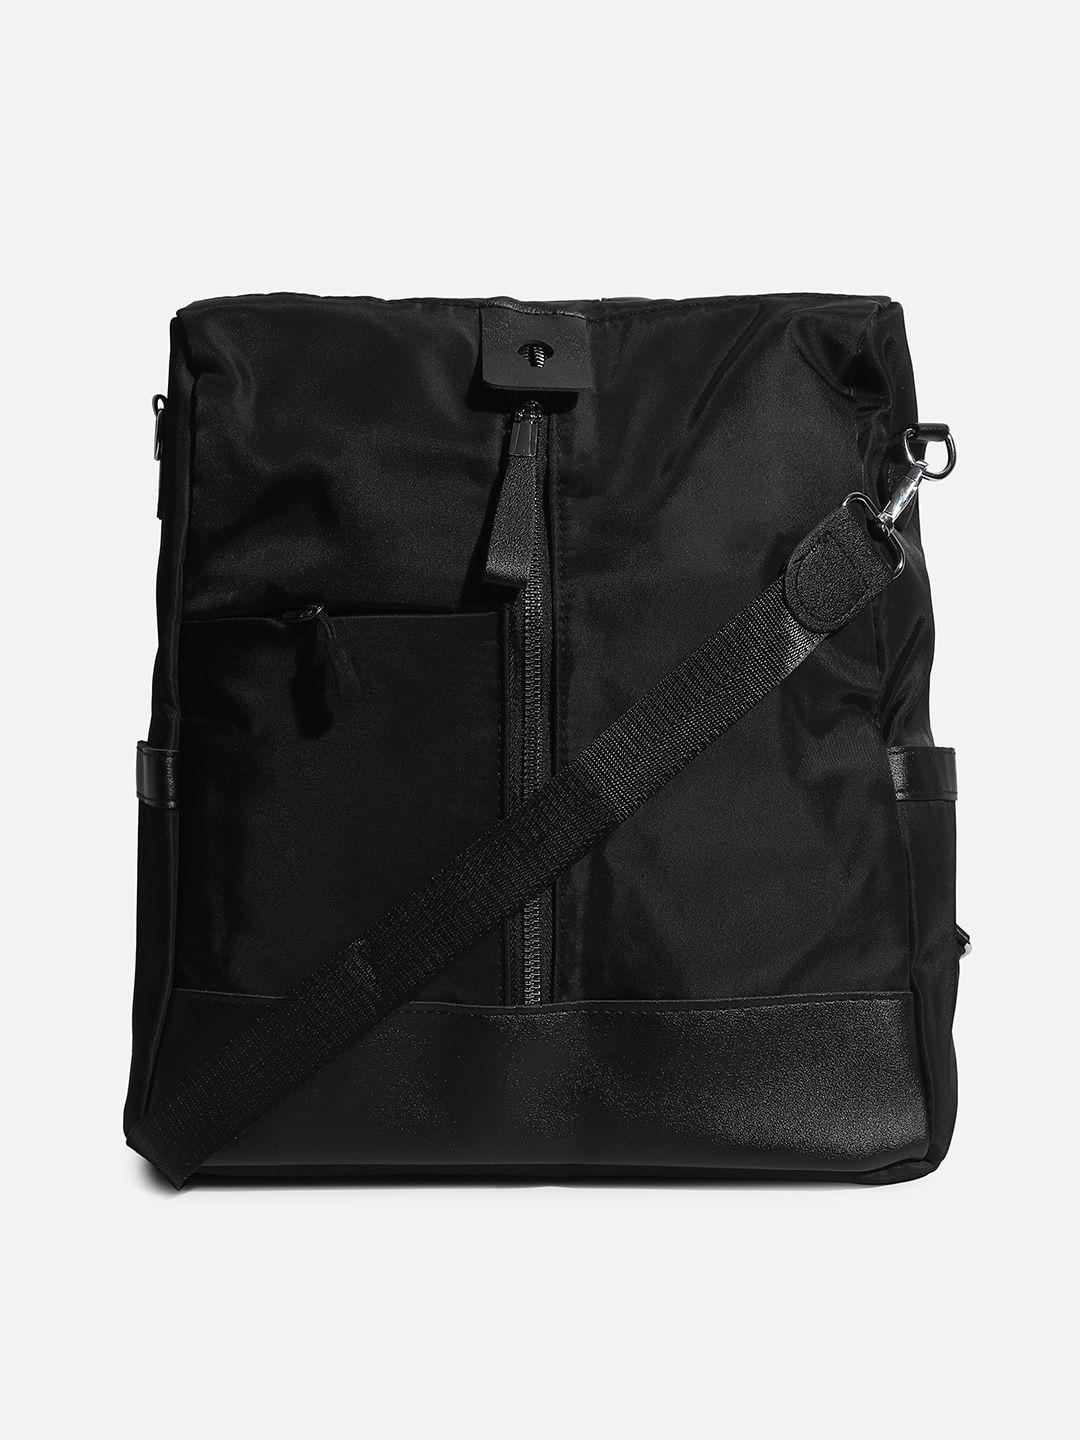 haute sauce by campus sutra women black backpack